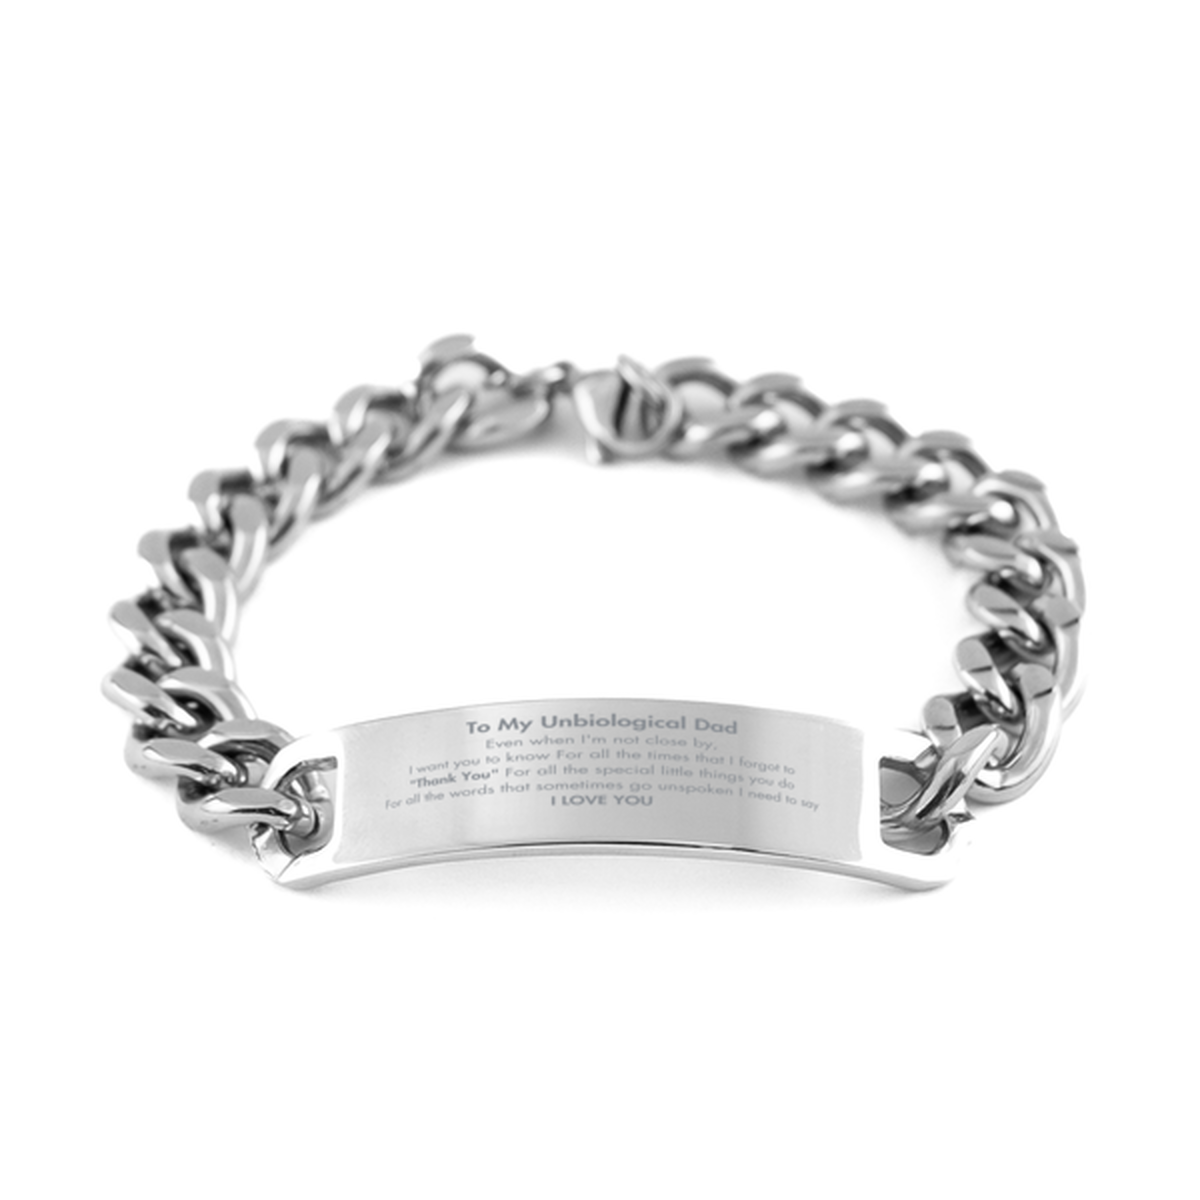 Thank You Gifts for Unbiological Dad, Keepsake Cuban Chain Stainless Steel Bracelet Gifts for Unbiological Dad Birthday Mother's day Father's Day Unbiological Dad For all the words That sometimes go unspoken I need to say I LOVE YOU